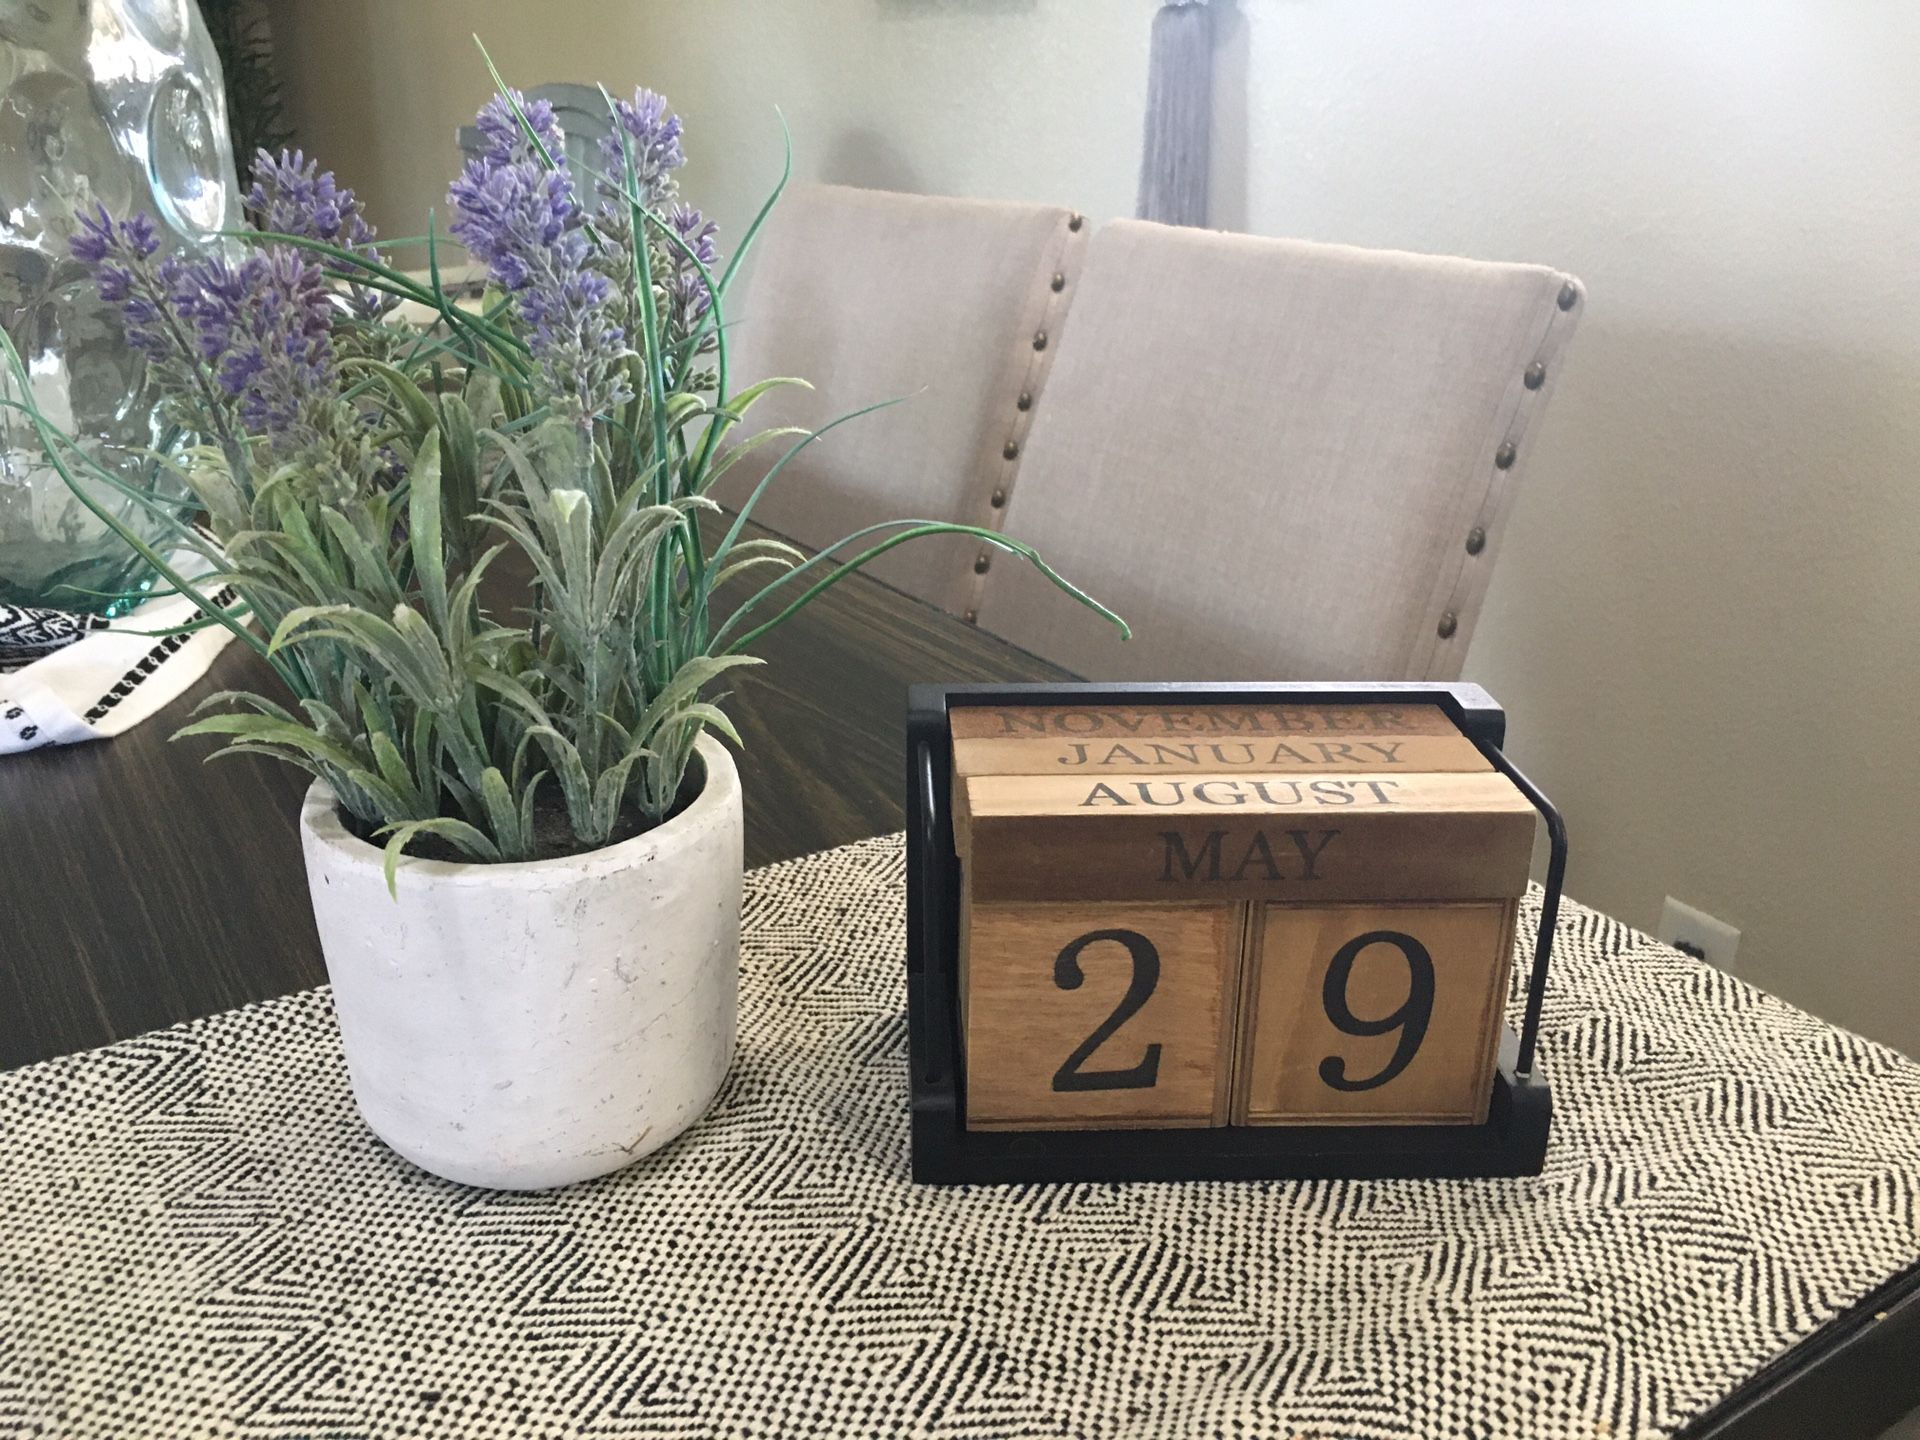 Farmhouse decor date changing and fake plant